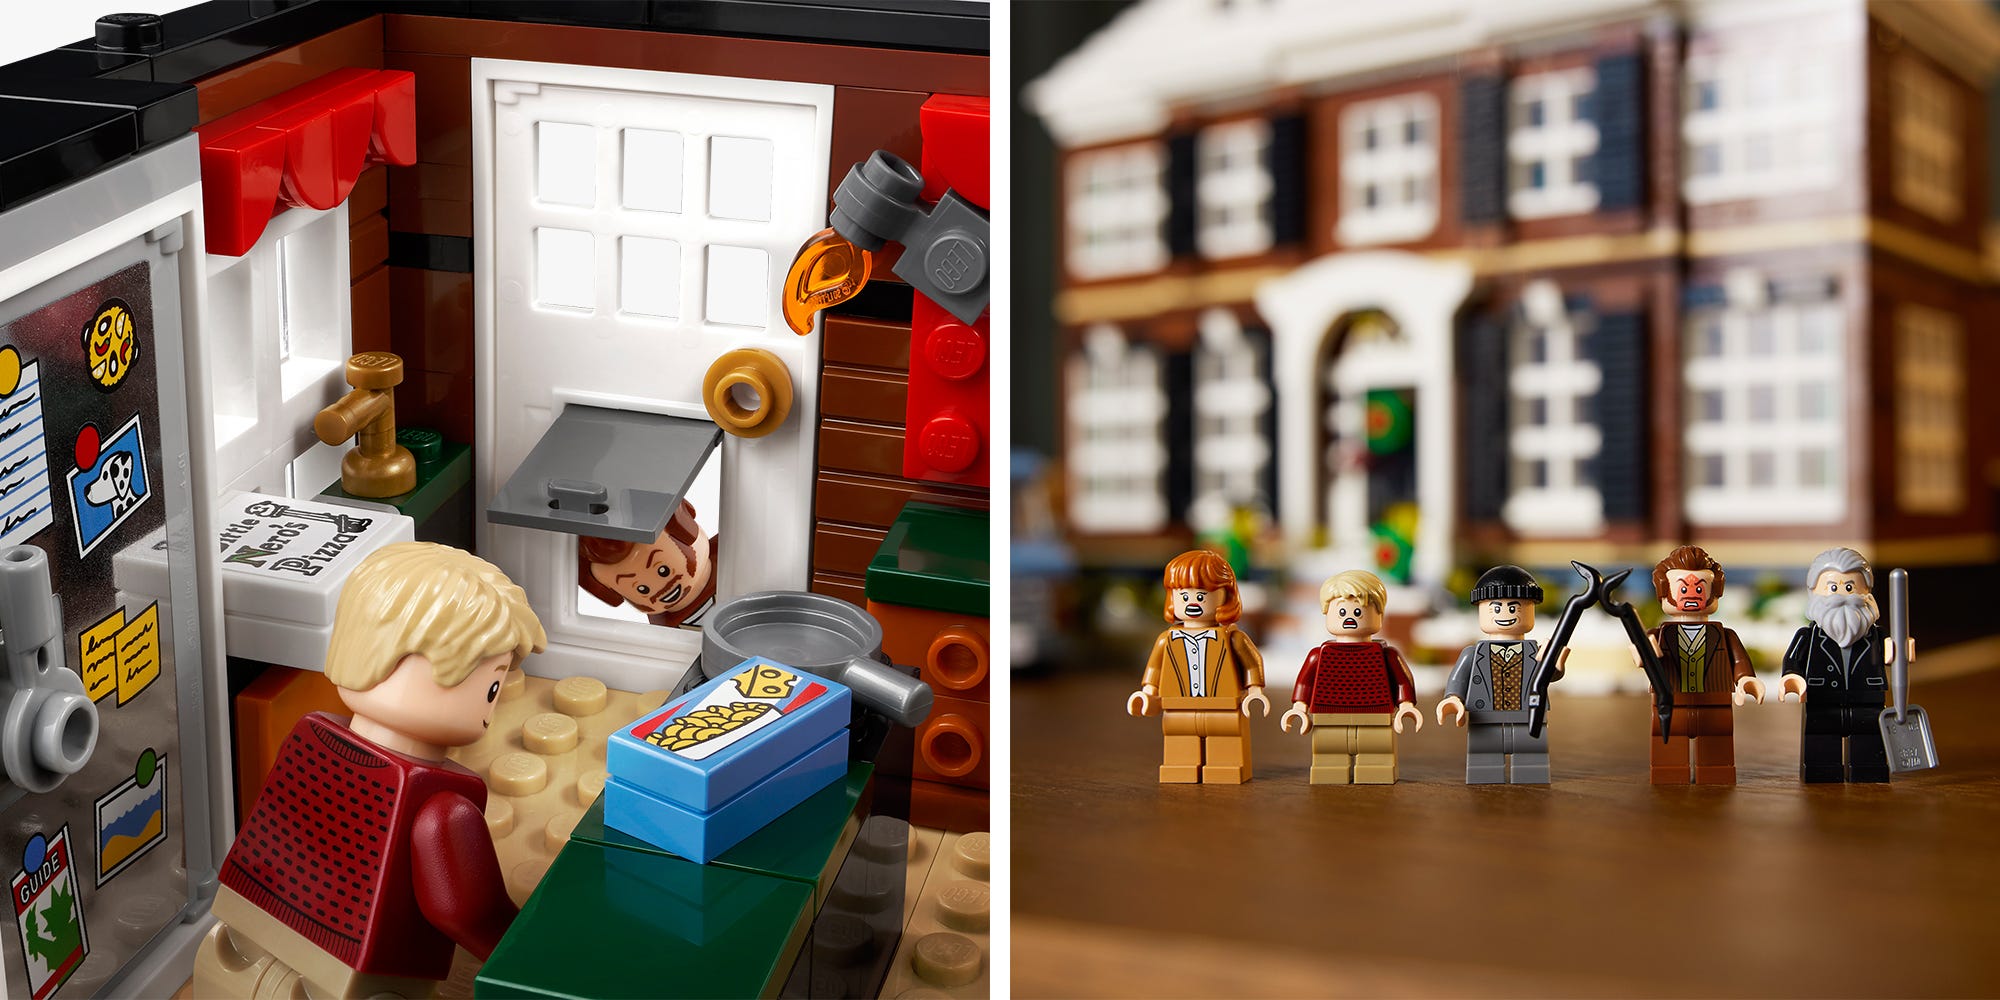 Lego Has a New 'Home Alone' Set, Complete With Character Figurines and Easter Eggs From the Film